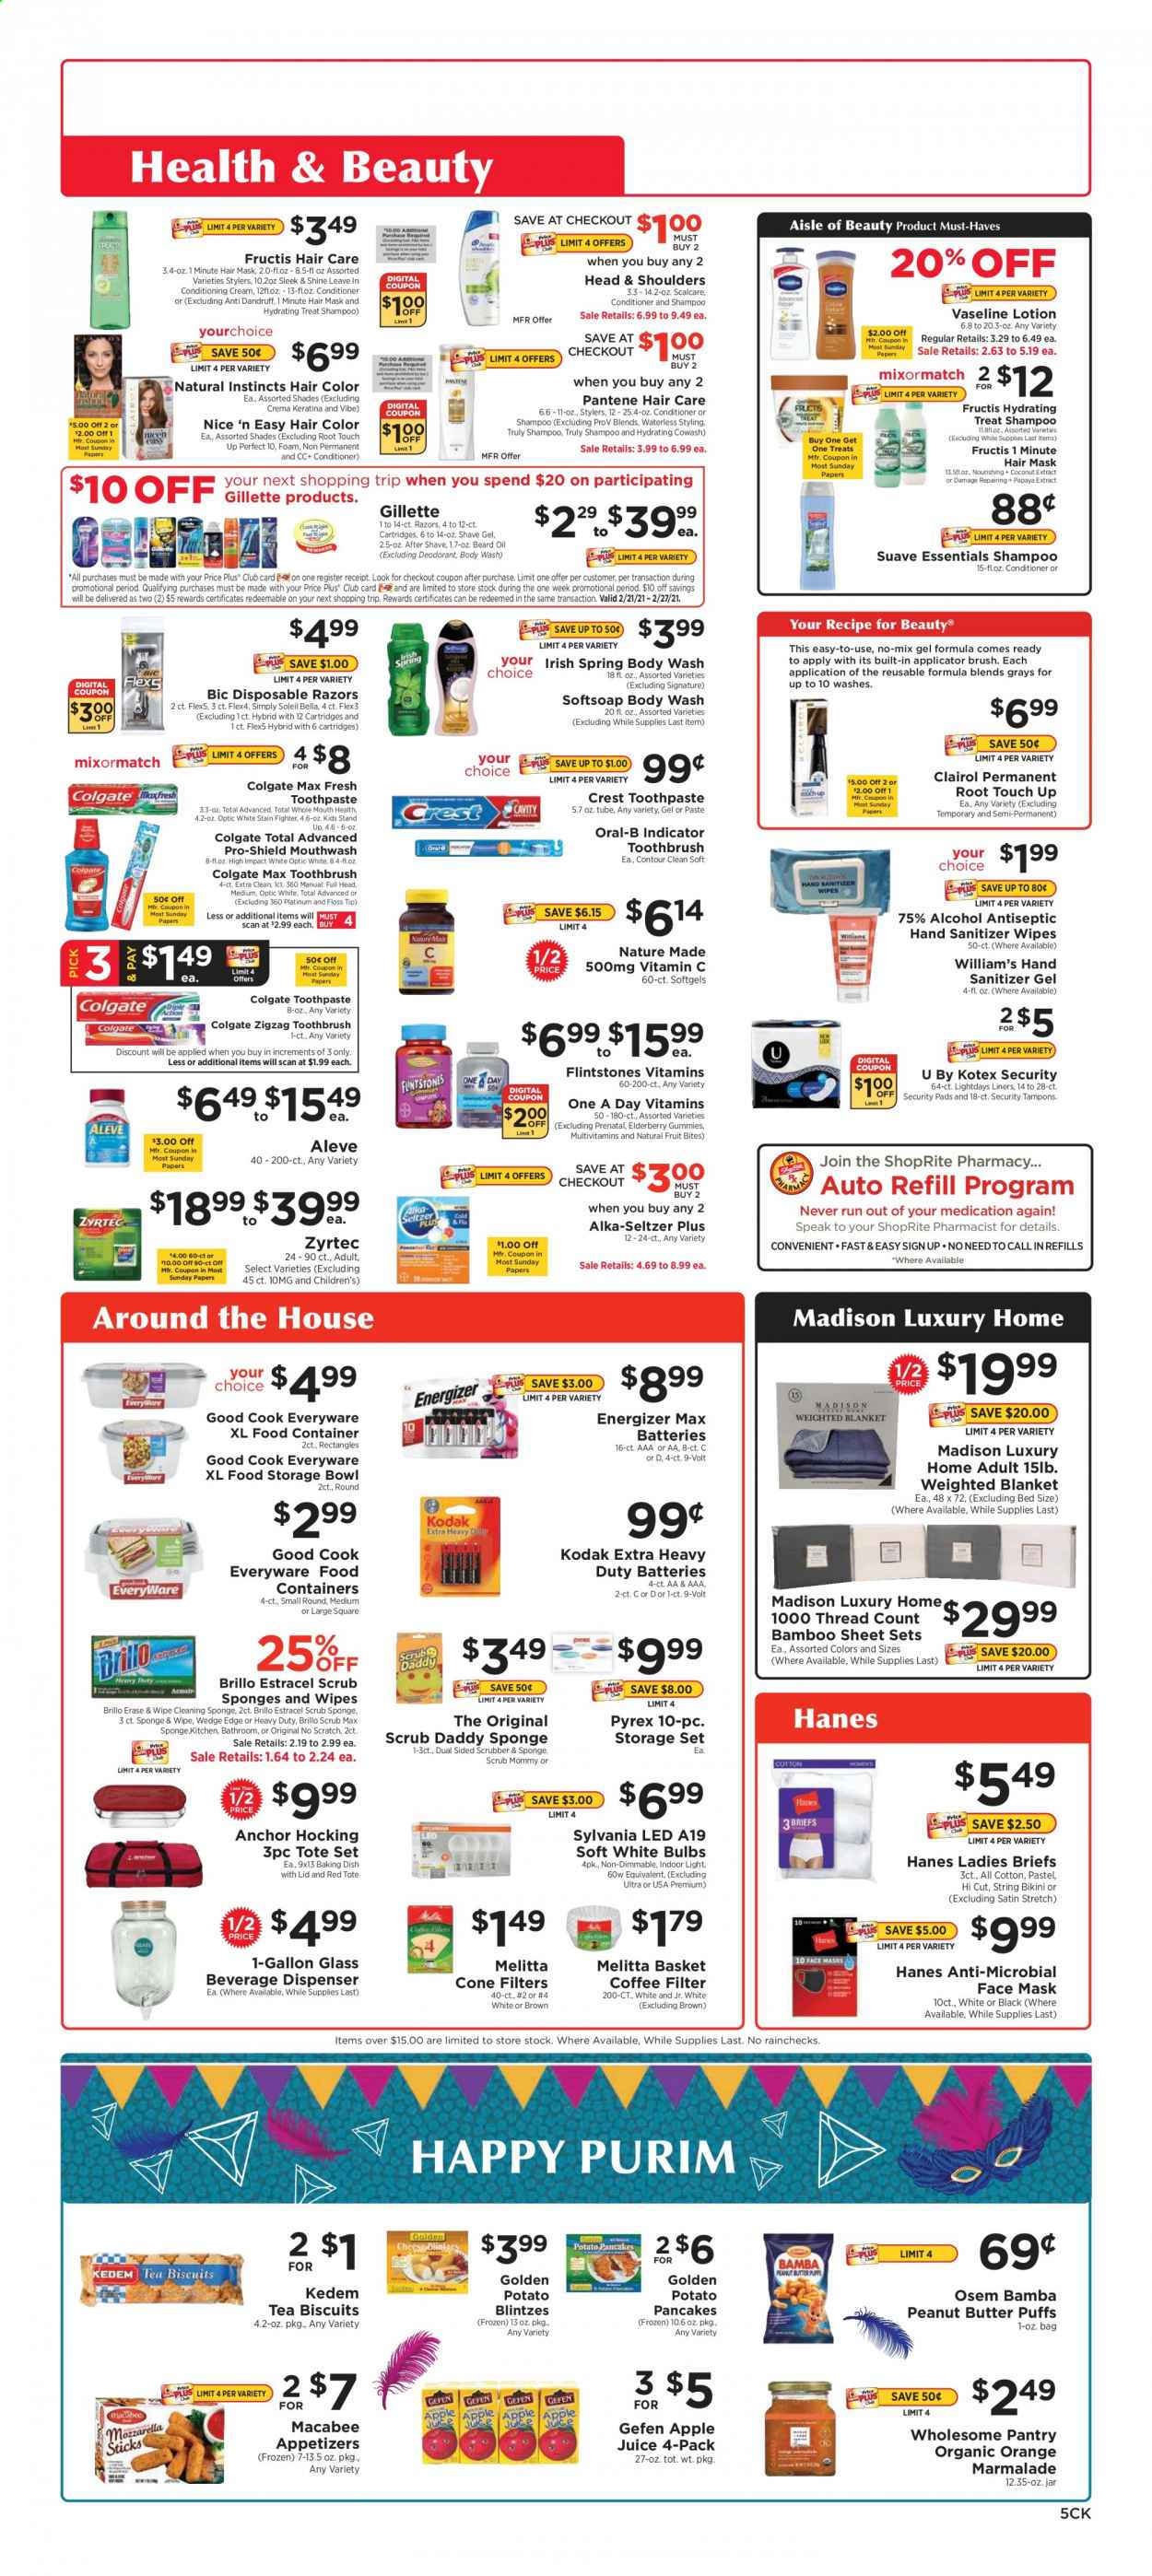 thumbnail - ShopRite Flyer - 02/21/2021 - 02/27/2021 - Sales products - puffs, pancakes, oranges, coconut, MTR, potato pancakes, mozzarella, biscuit, Bamba, peanut butter, apple juice, juice, seltzer water, coffee, TRULY, wipes, body wash, shampoo, Softsoap, Suave, Vaseline, Colgate, toothbrush, Oral-B, toothpaste, mouthwash, Crest, Kotex, tampons, Clairol, conditioner, Head & Shoulders, Pantene, hair color, hair mask, Fructis, body lotion, after shave, BIC, Gillette, shave gel, disposable razor, sponge, bowl, dispenser, Pyrex, storage container set, paper, battery, bulb, Energizer, Sylvania, blanket, Aleve, multivitamin, Nature Made, vitamin c, Zyrtec, Prenatal, Alka-seltzer, bikini. Page 5.